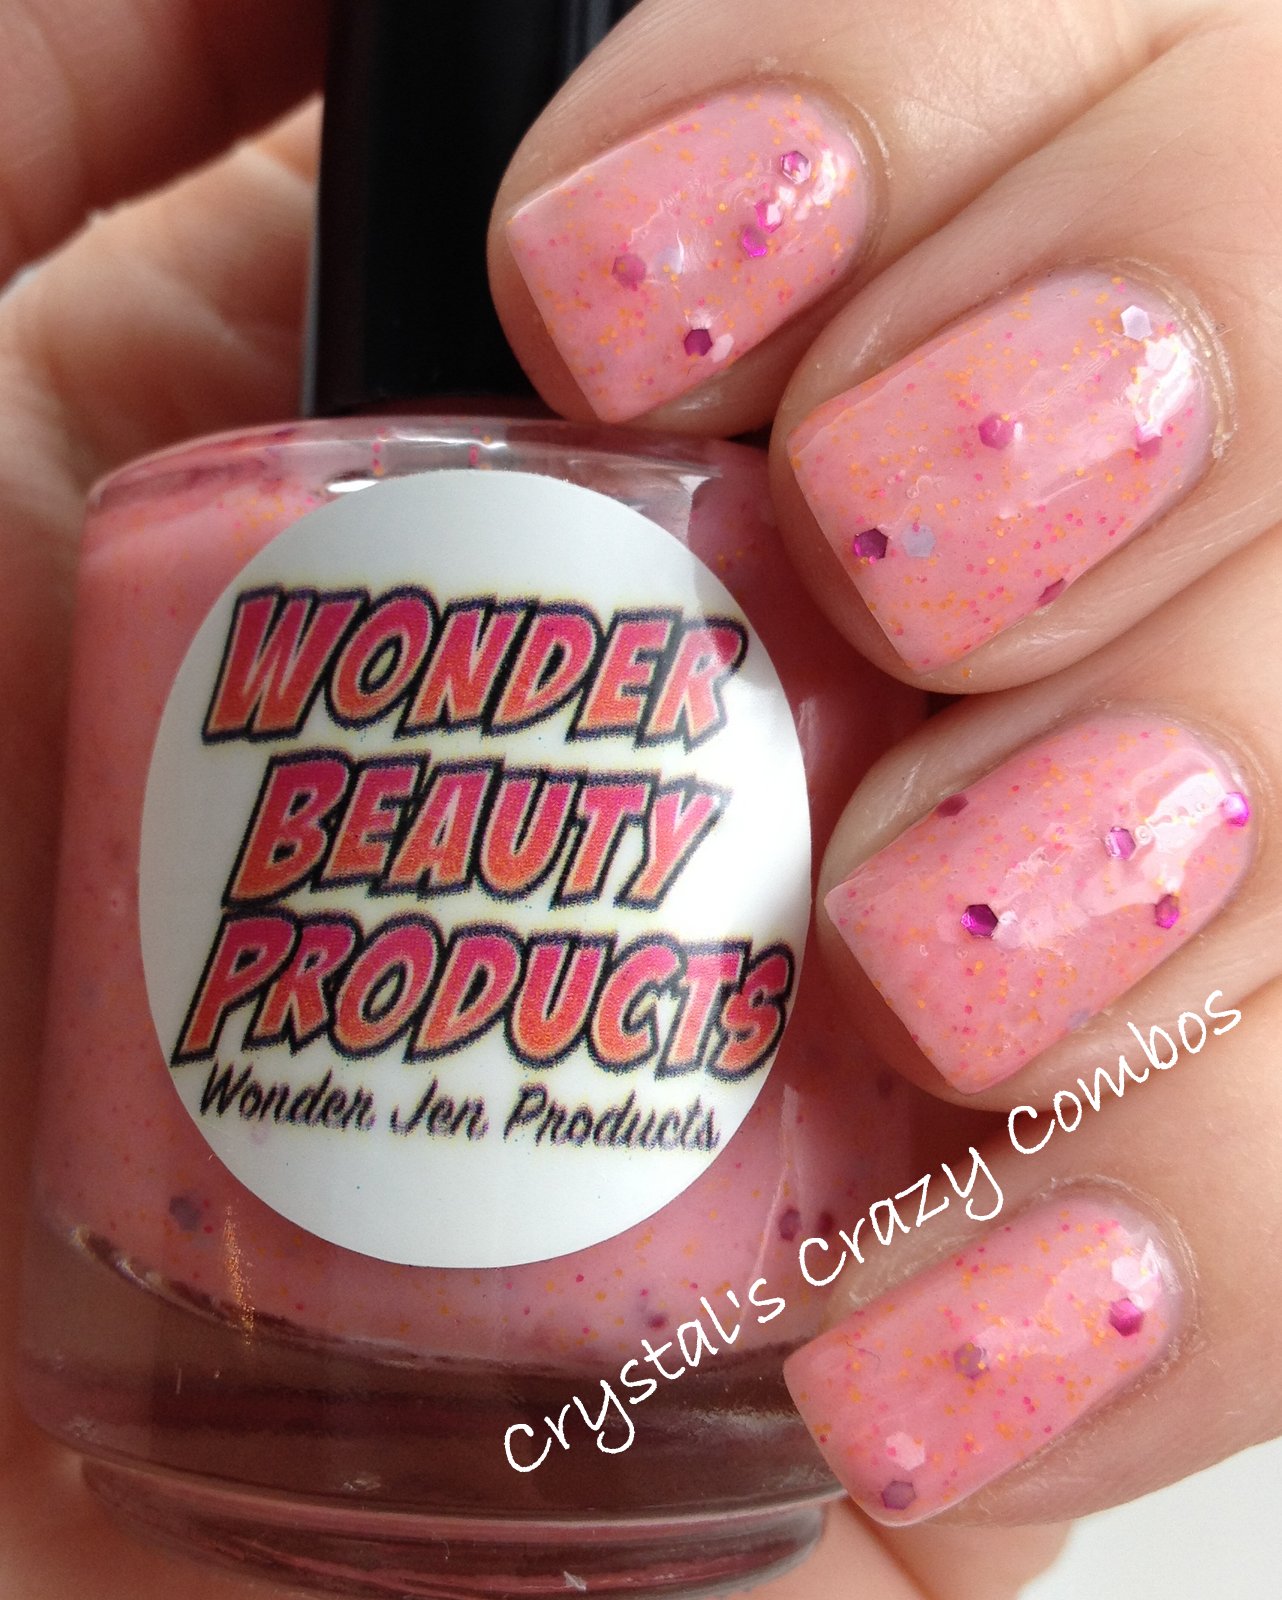 Crystal's Crazy Combos: Wonder Beauty Products - Strawberry Shortcake